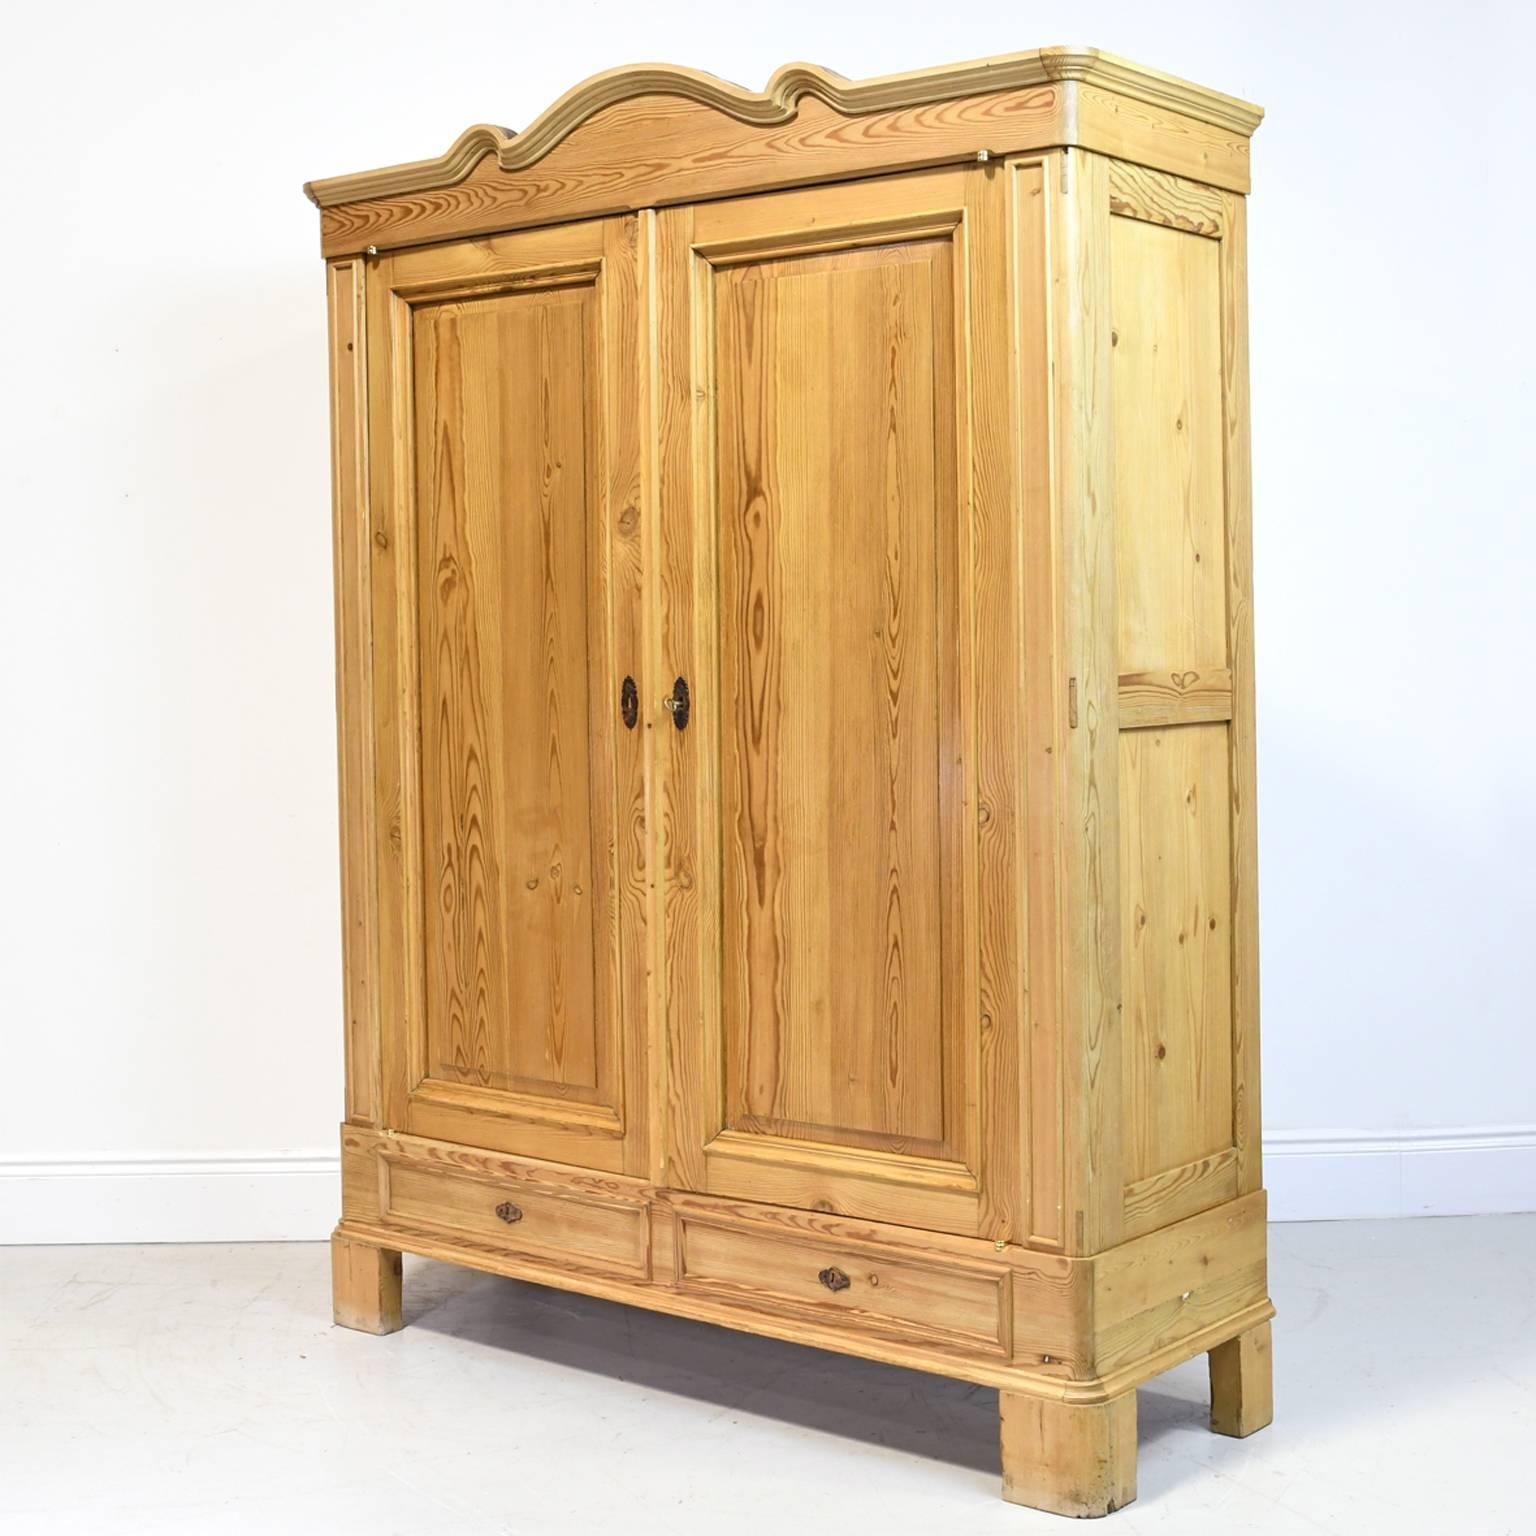 A large and handsome North German pine armoire with original curved bonnet, two paneled doors, two exterior drawers with original leather escutcheon key plates, and interior shelving, circa 1825. 
Offers lots of storage for clothes or linens!